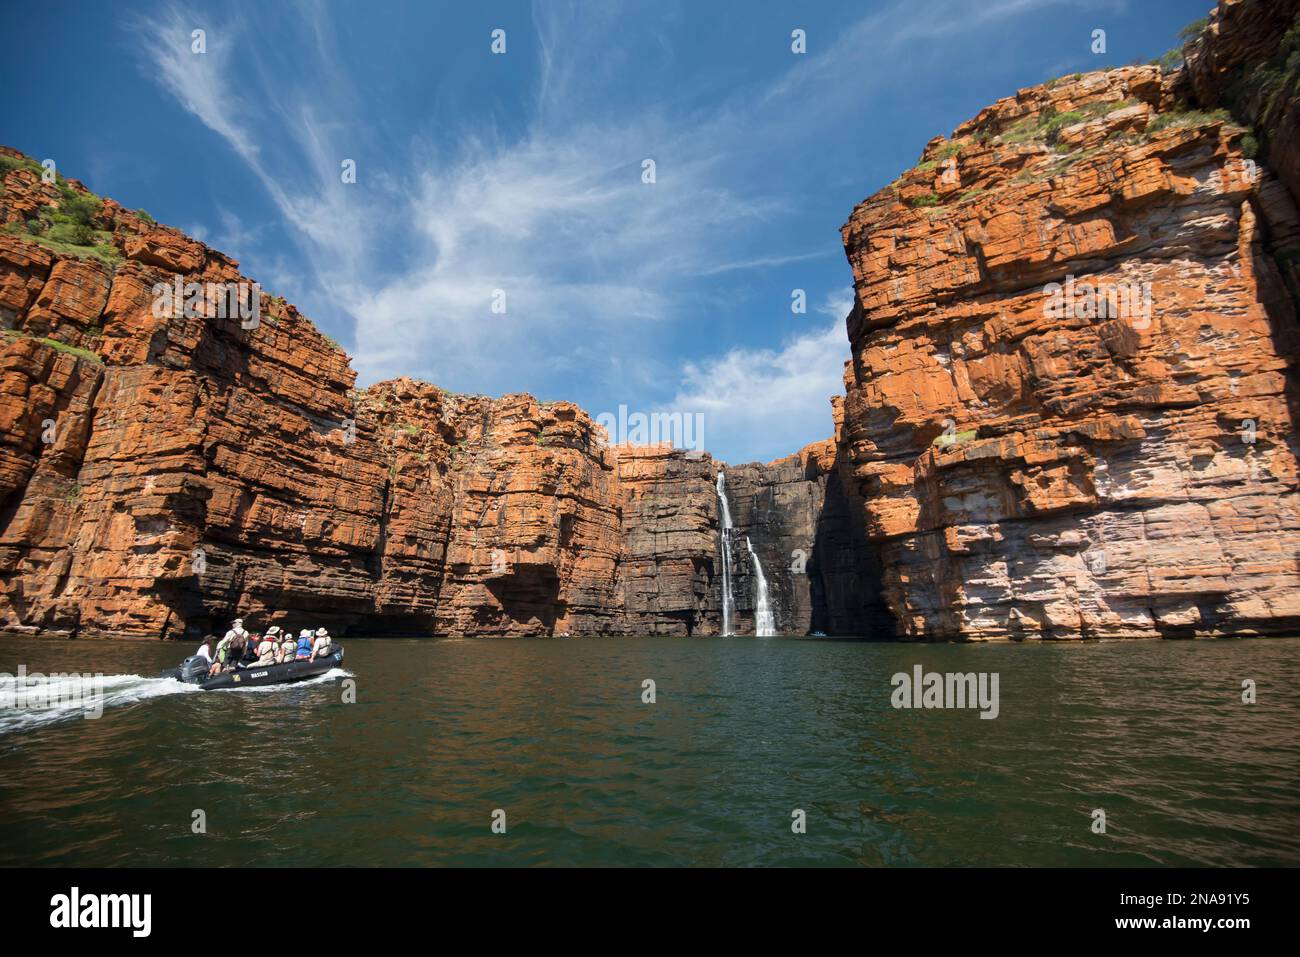 Expedition travelers aboard a zodiac inflatable boat explores the King George River and waterfall in the Kimberley Region of Western Australia. Stock Photo